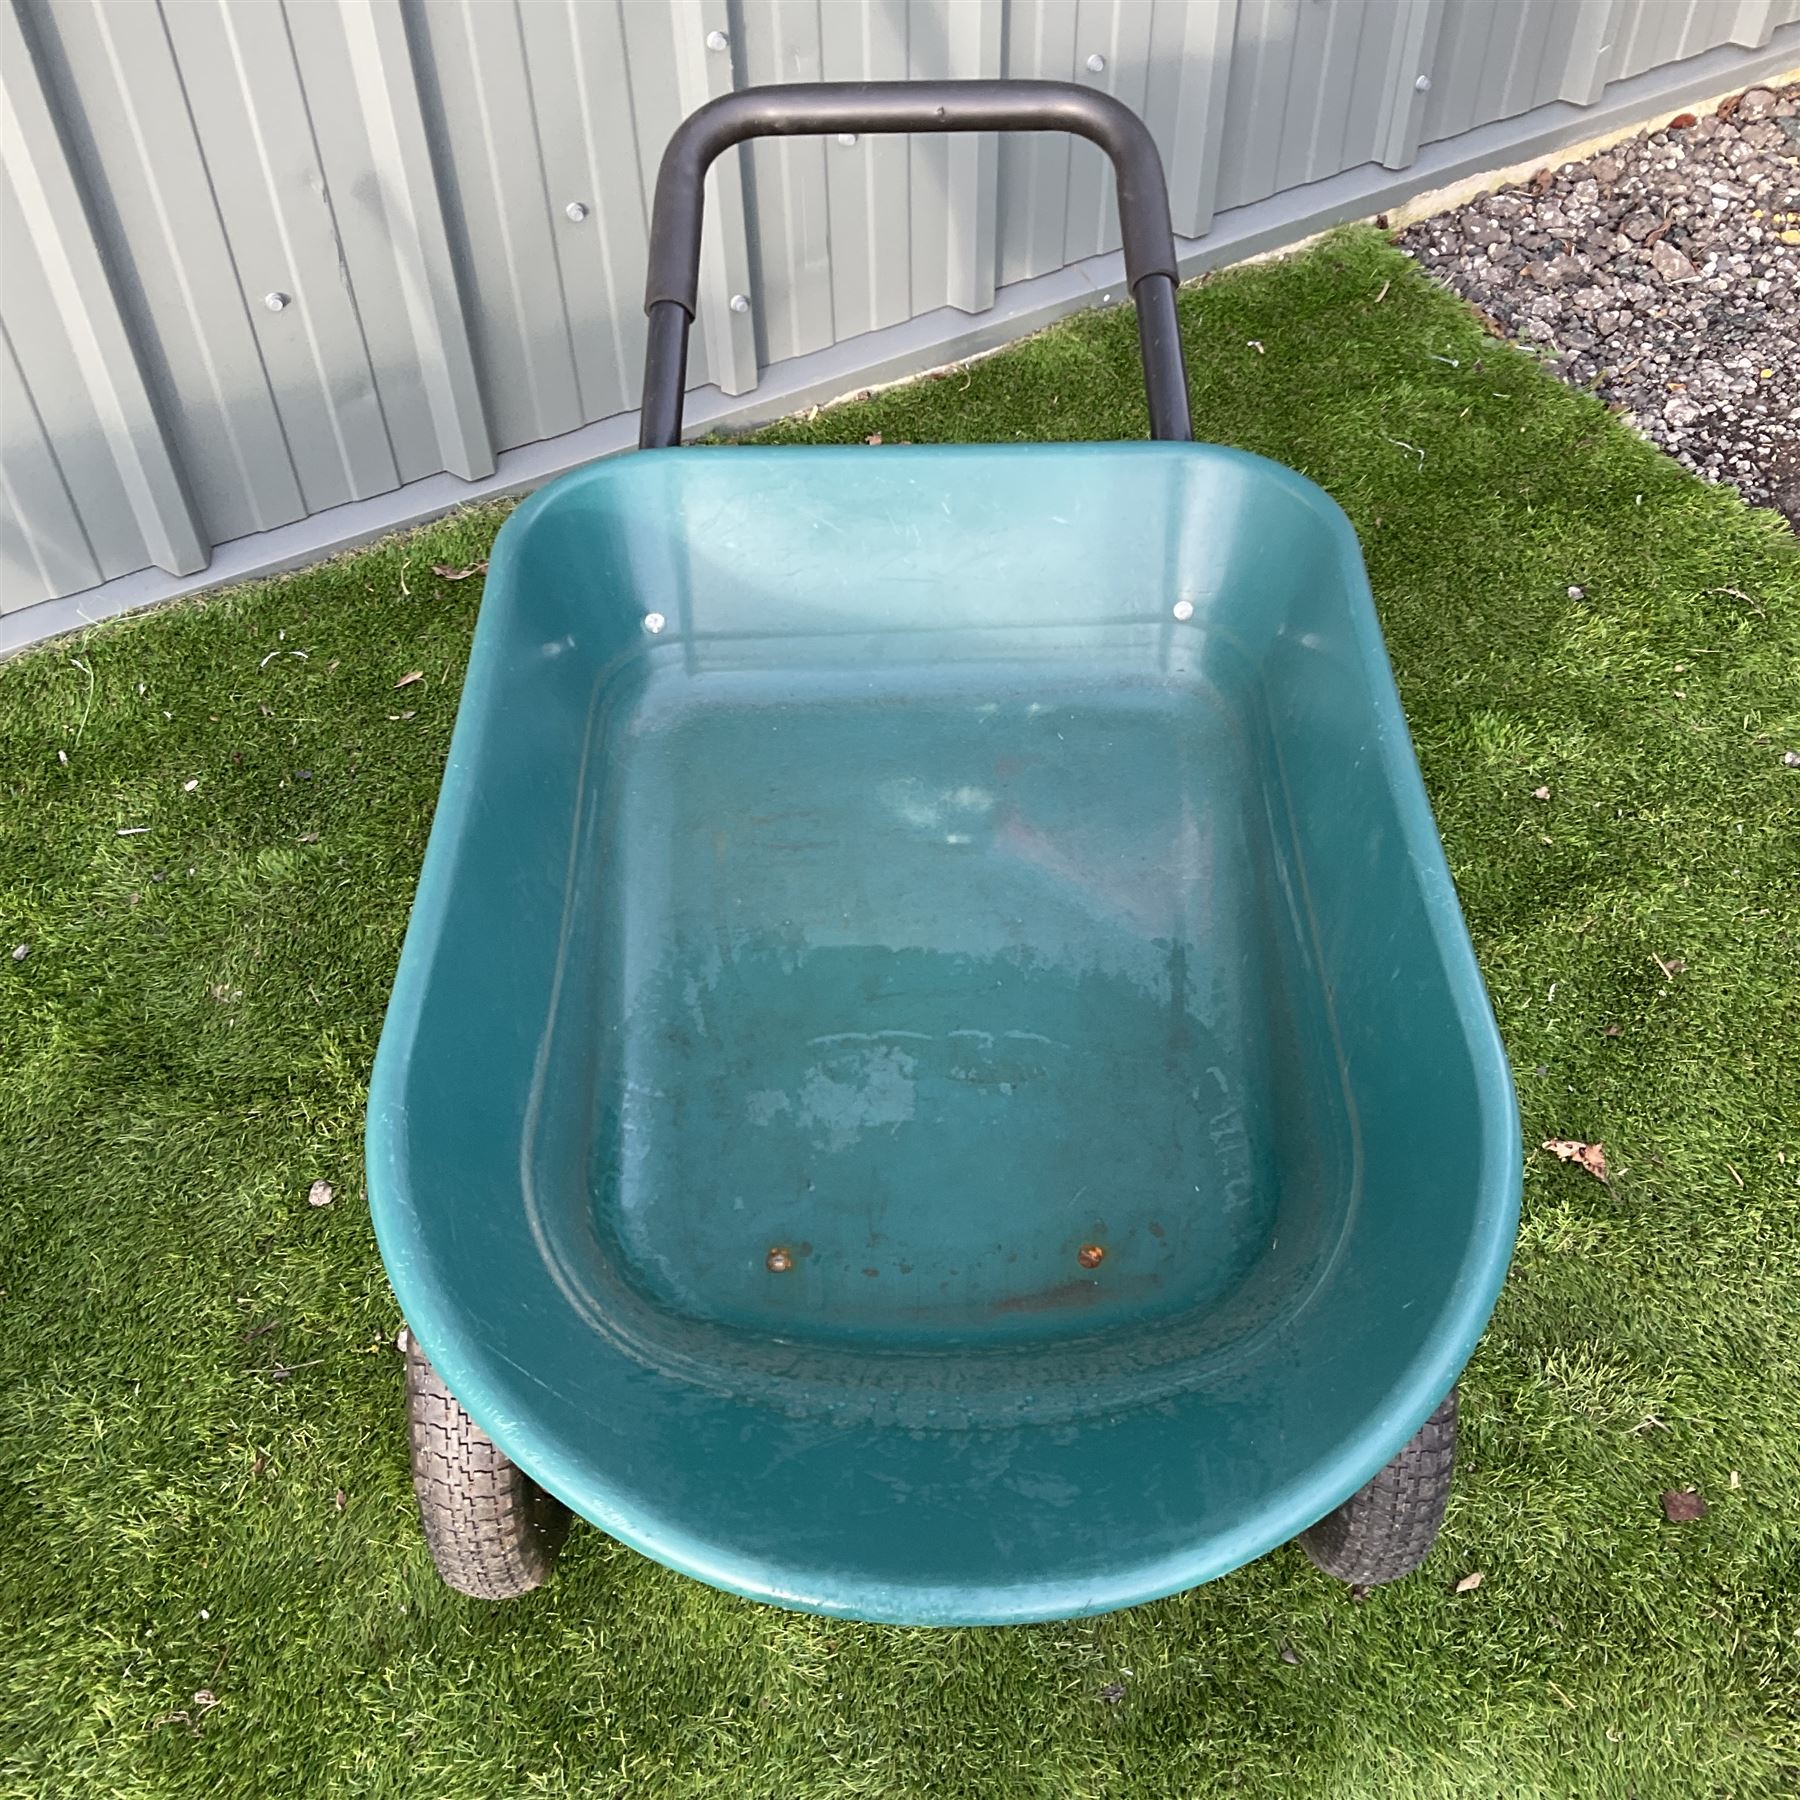 Pair of single and two tire metal wheelbarrows - Image 4 of 6